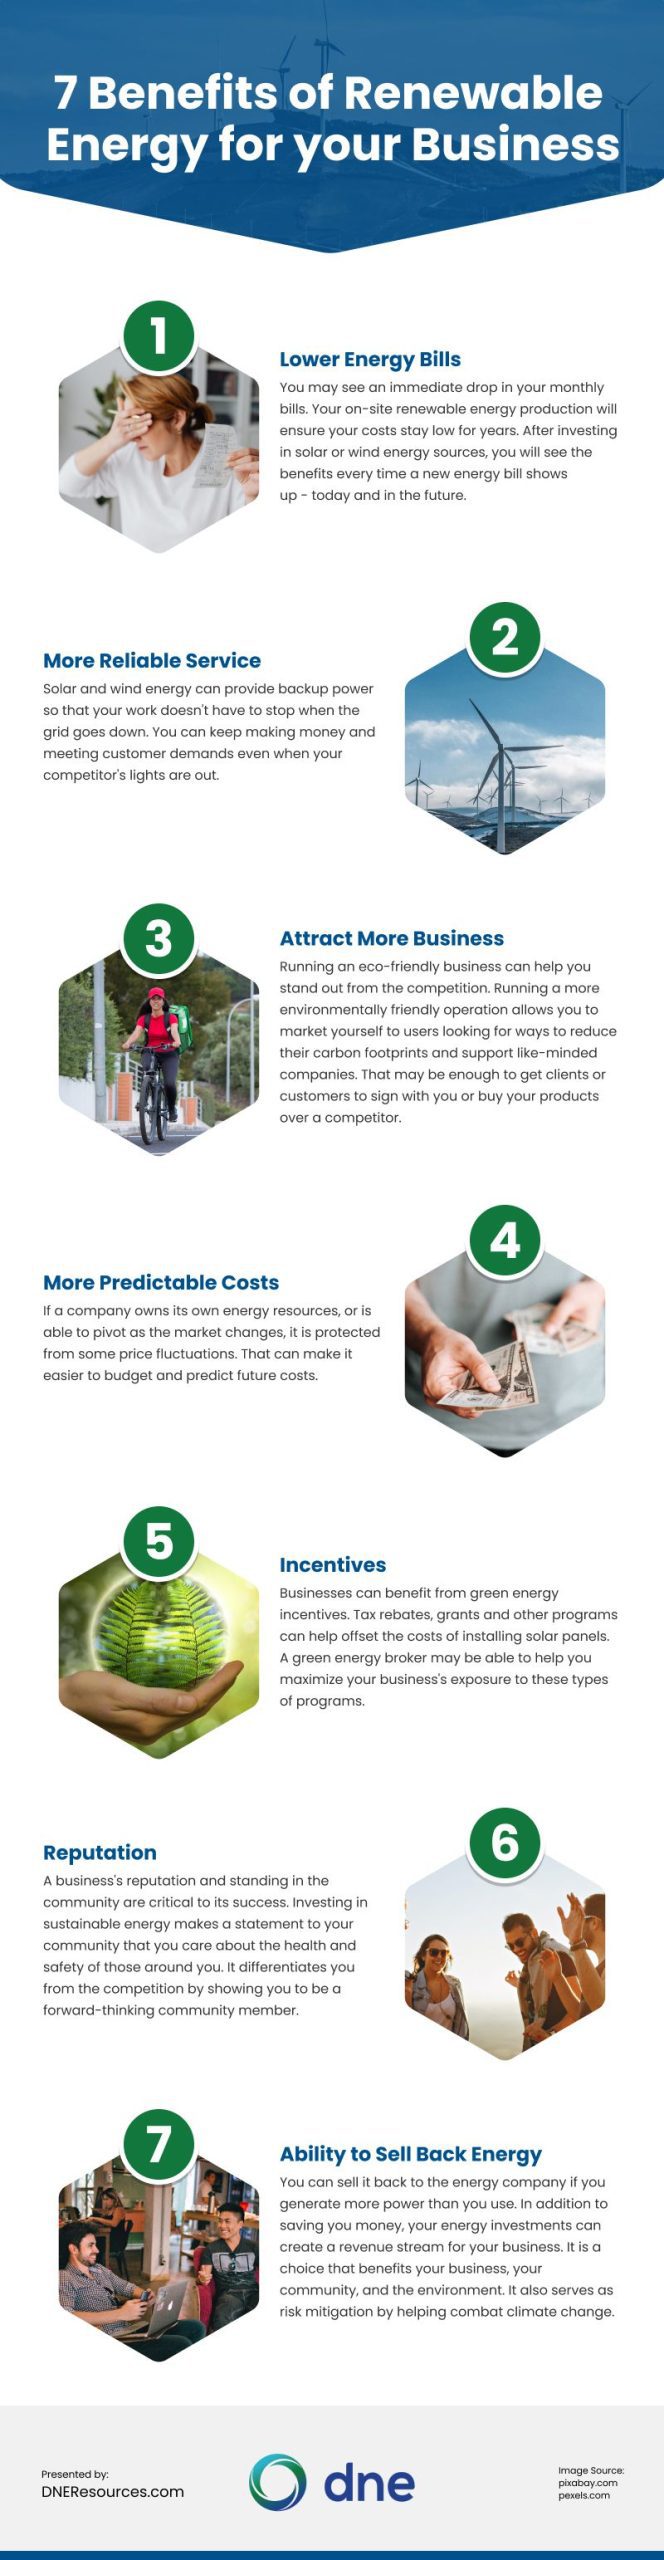 7 Benefits of Renewable Energy for your Business Infographic